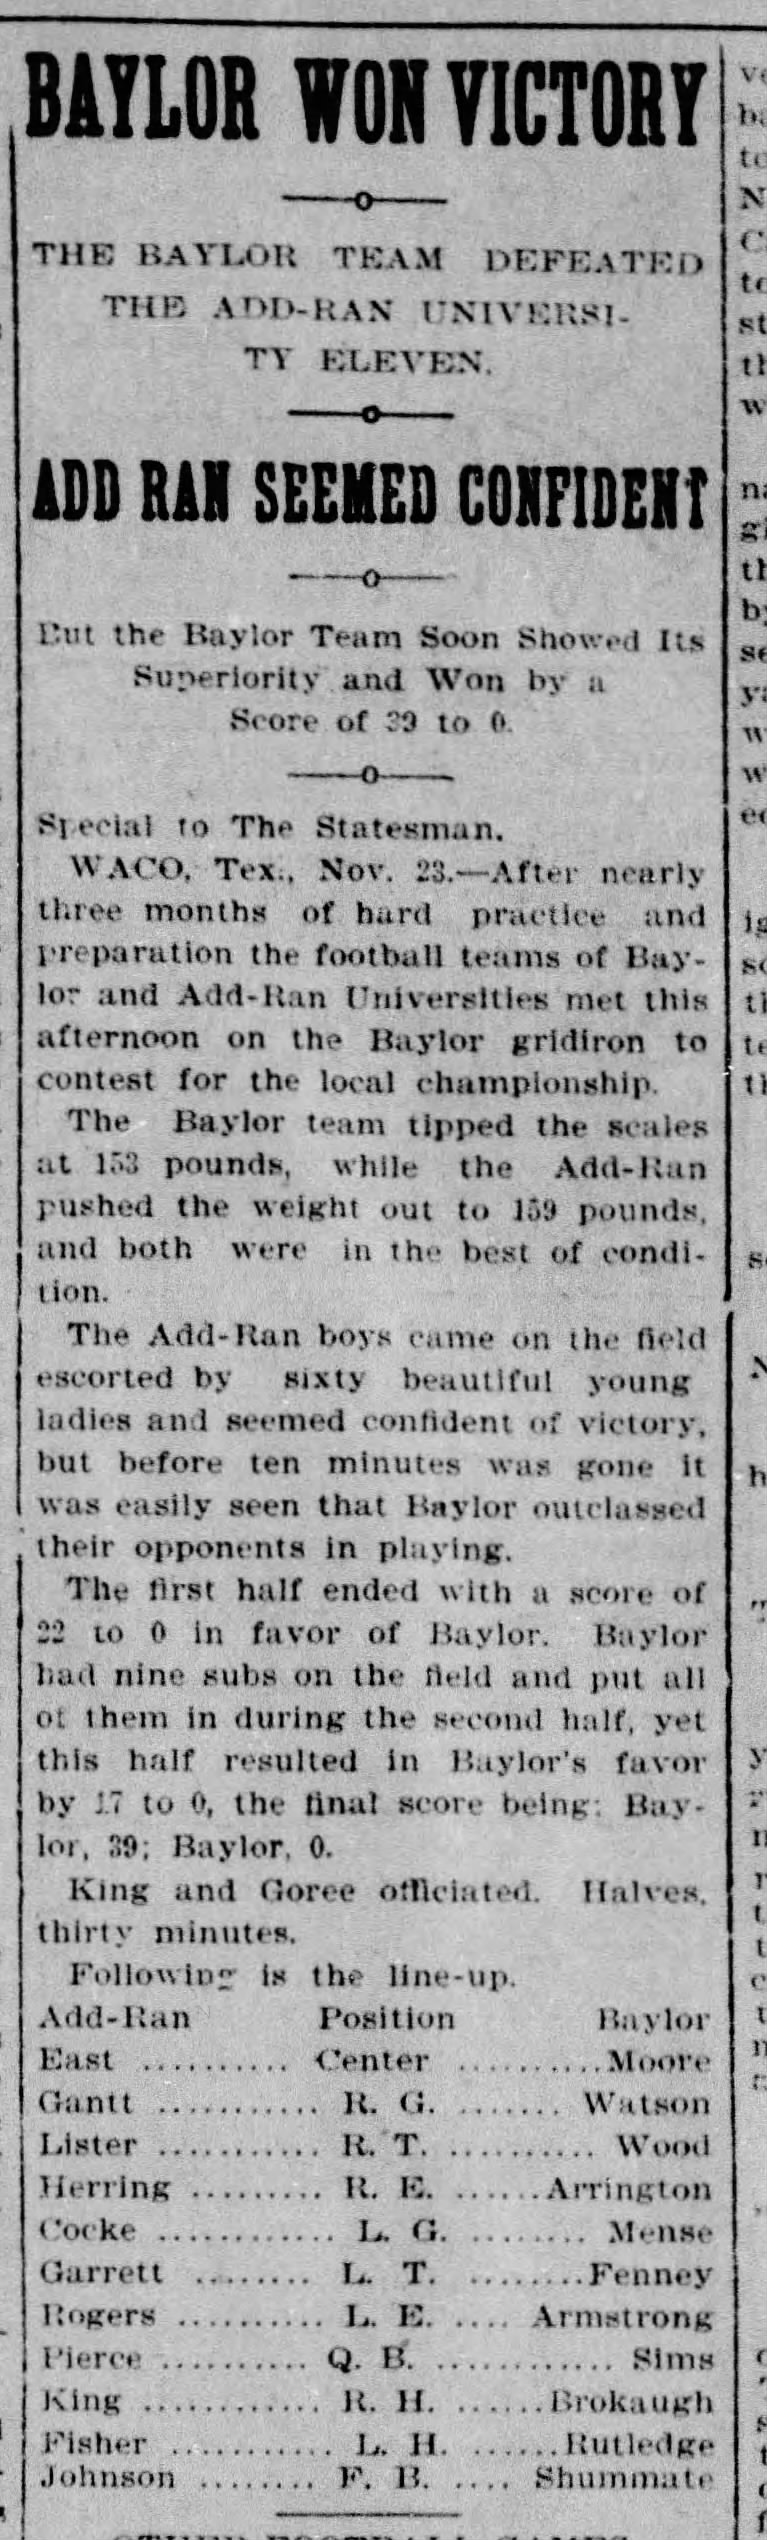 Baylor Won Victory: The Baylor Team Defeated the Add-Ran University Eleven